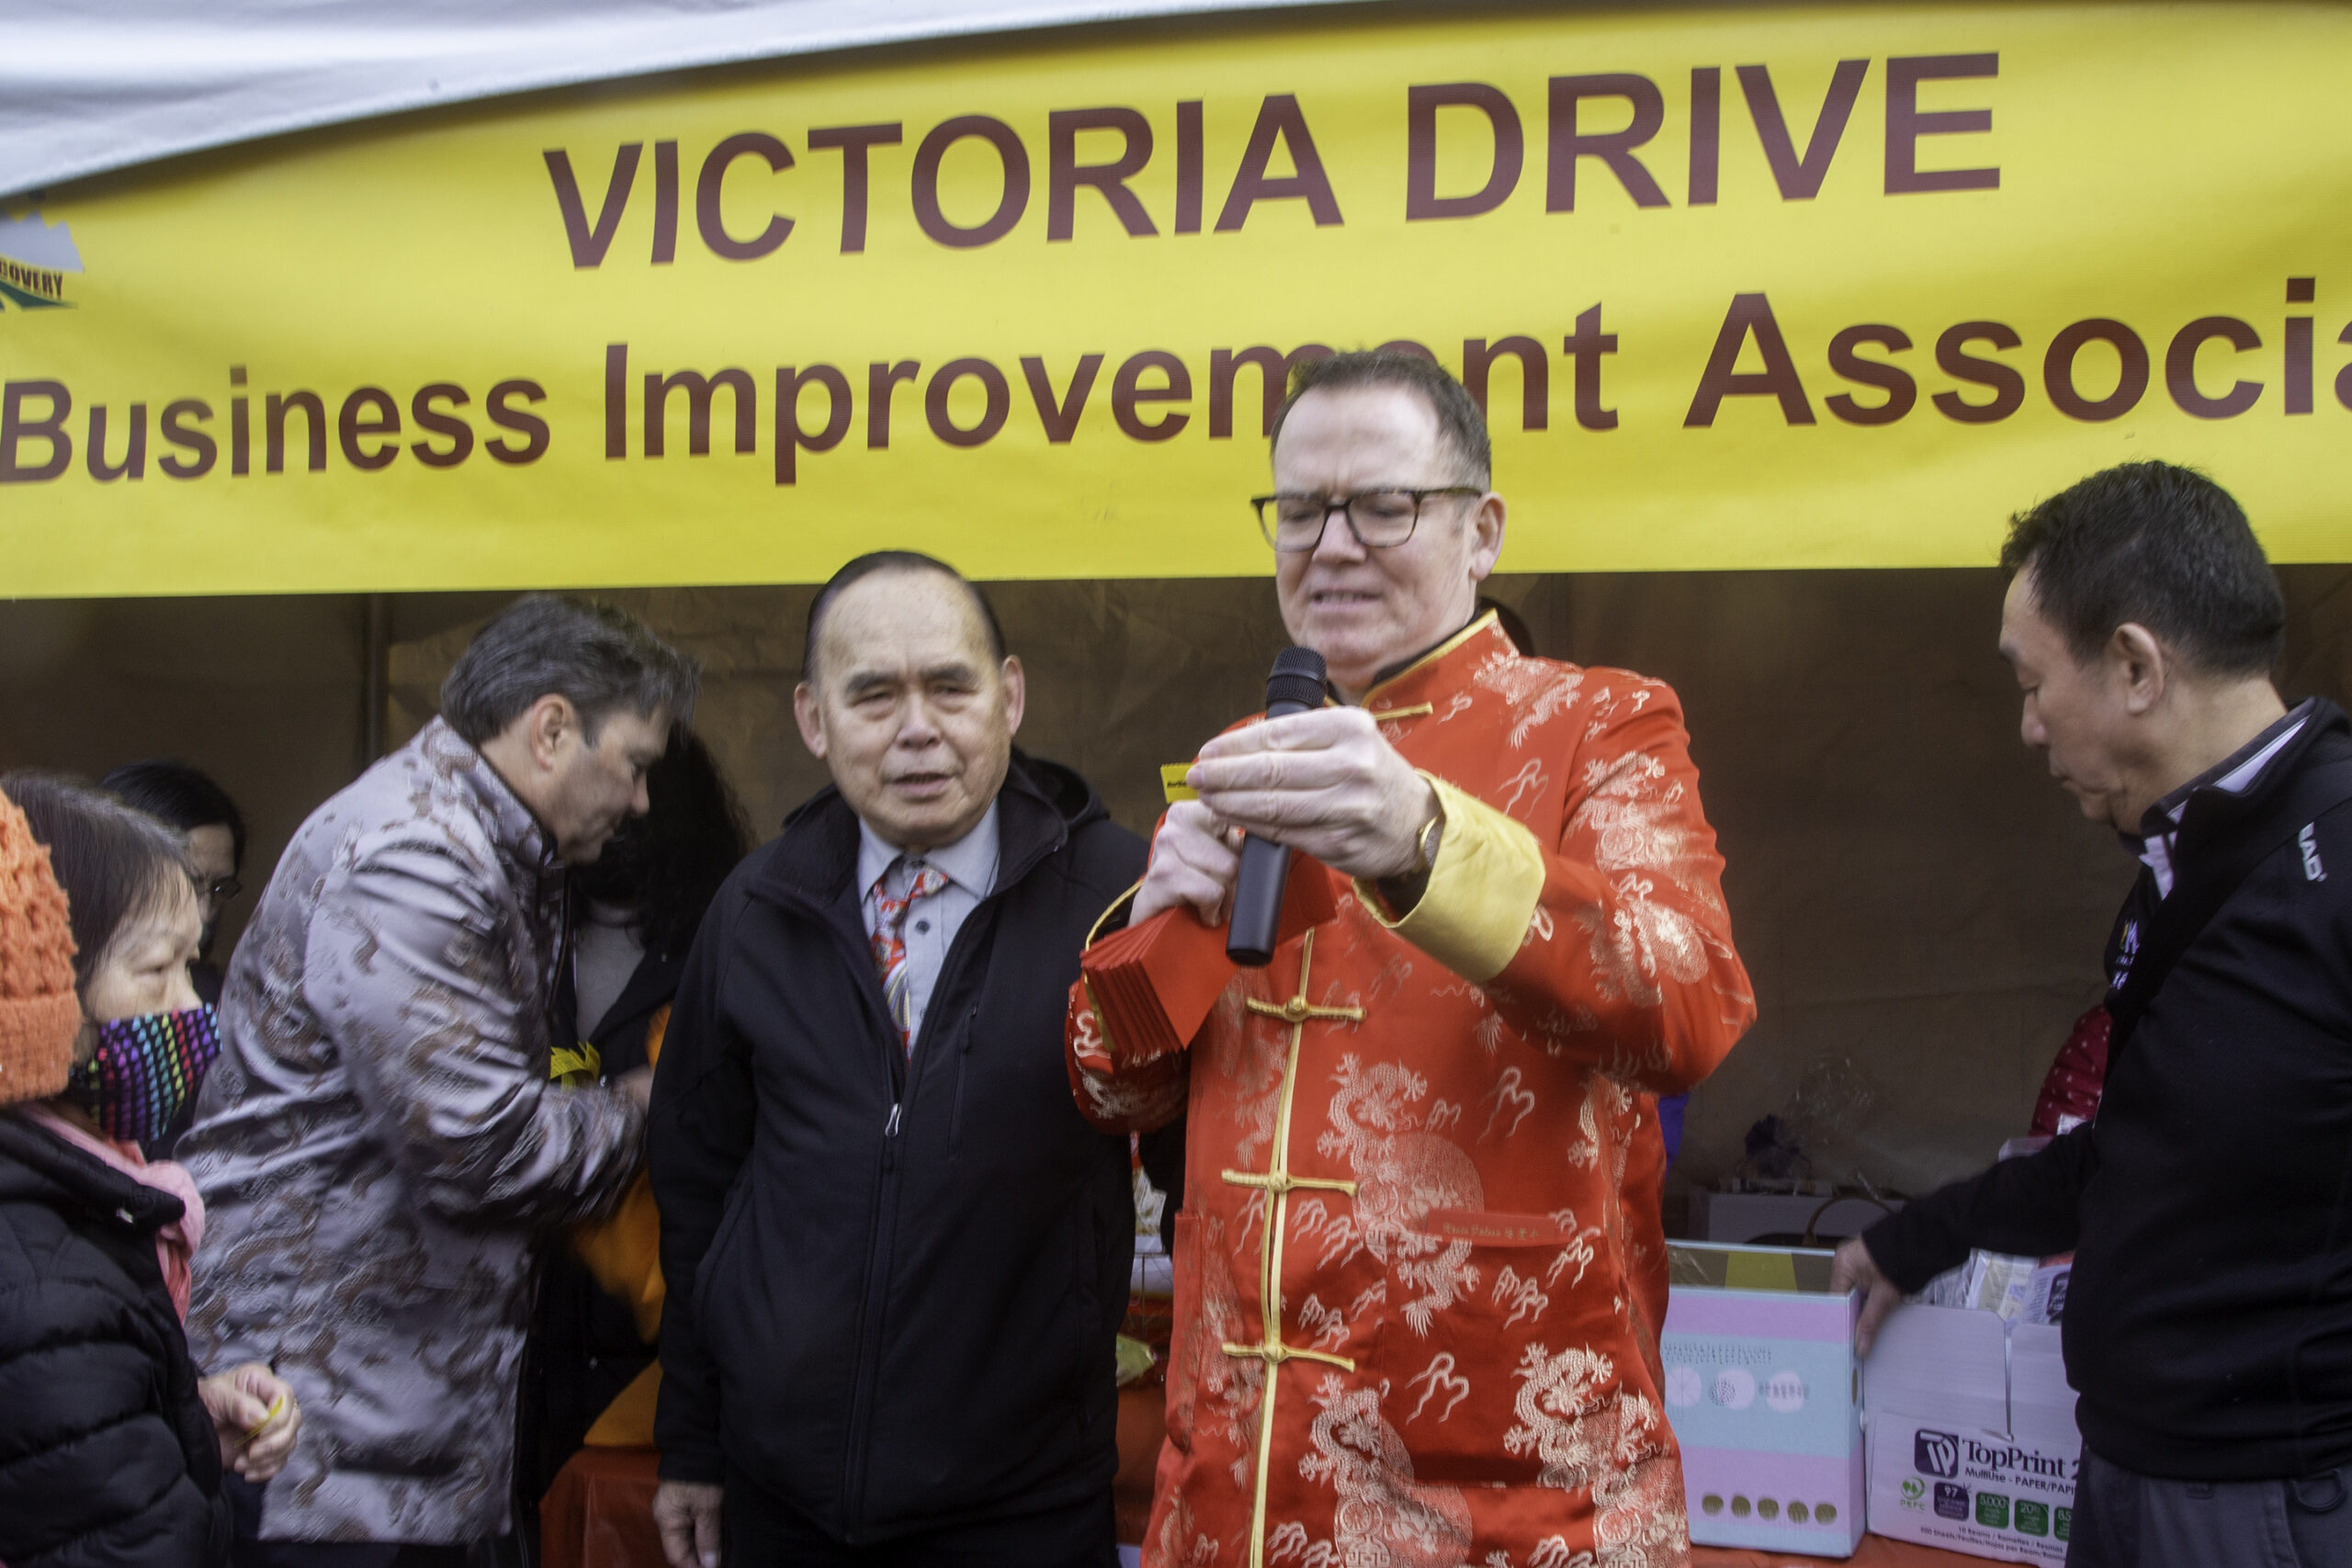 2023-lunar-new-year-celebrations-on-victoria-drive-vancouver-canada_52655648056_o